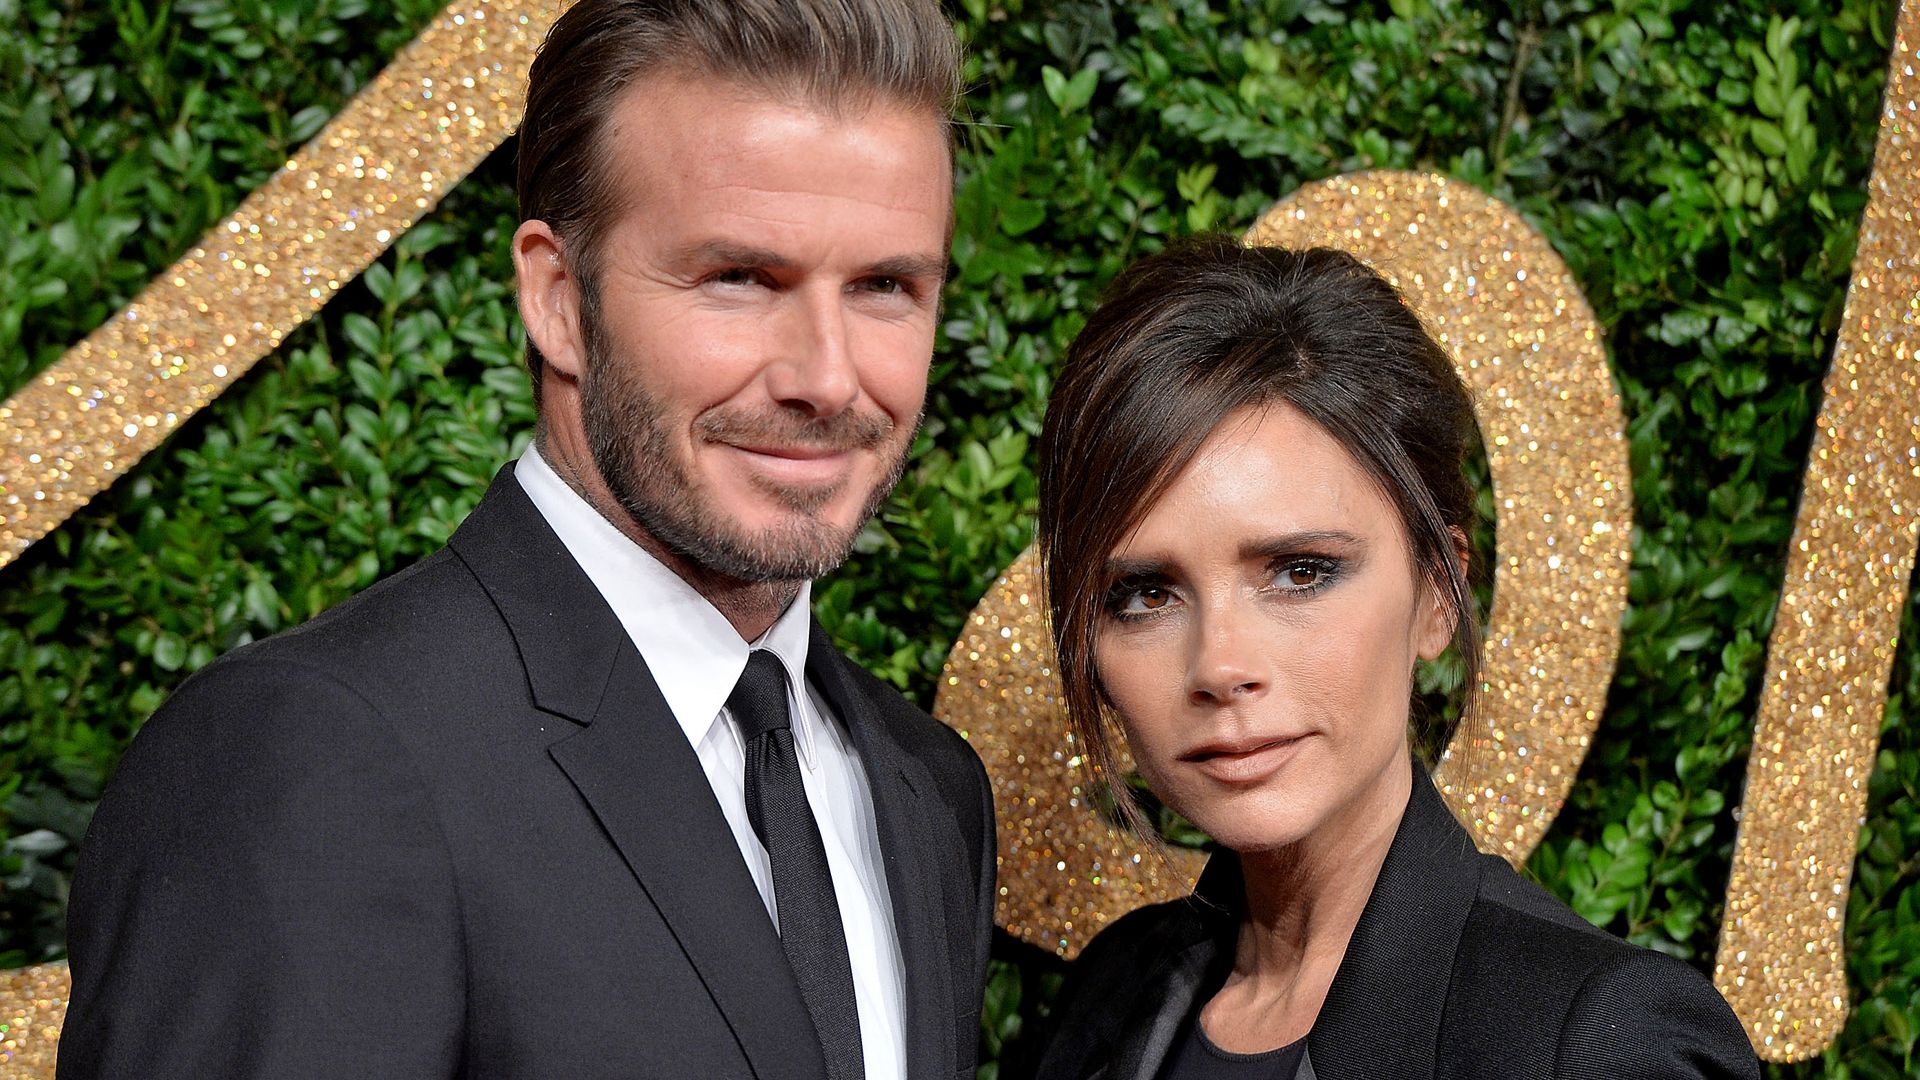 David Beckham and Victoria Beckham at an awards ceremony in all black